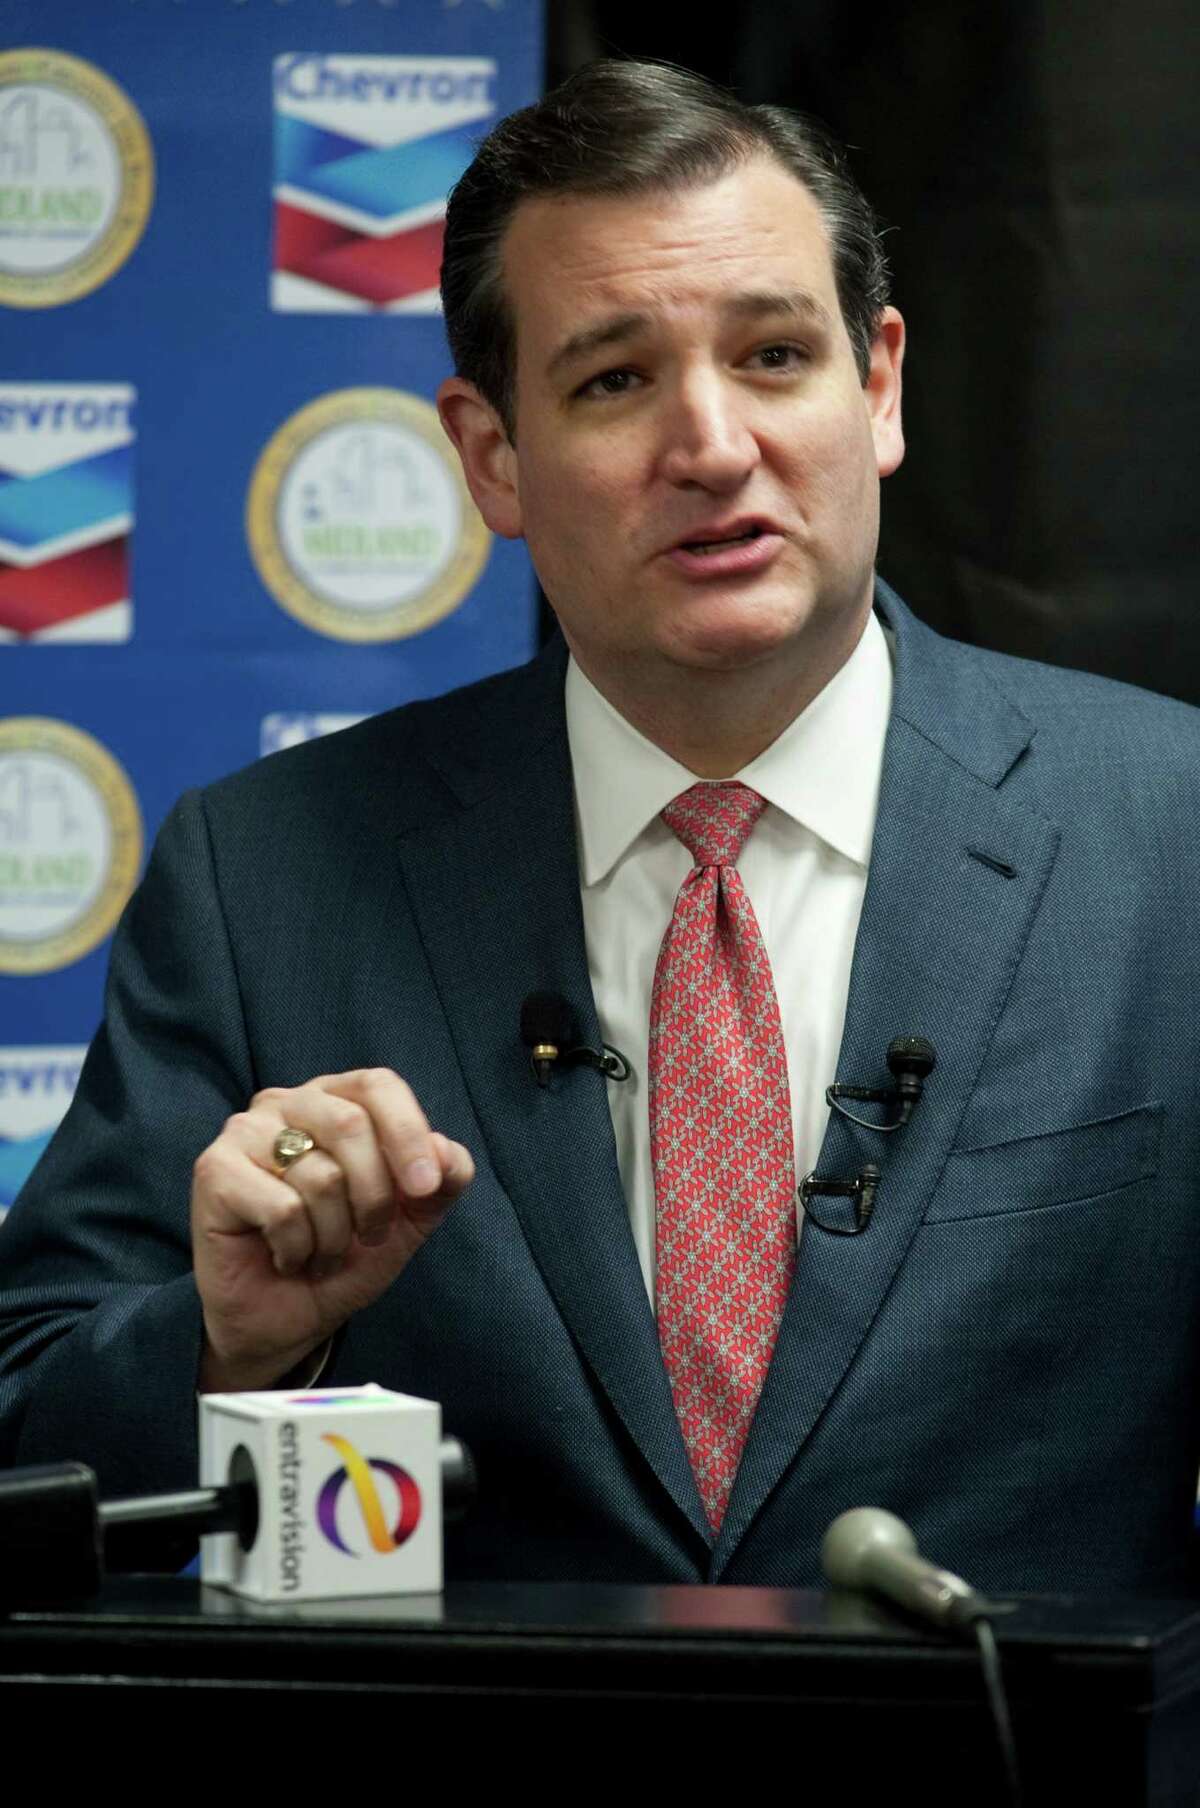 Senator Ted Cruz speaks at a press conference Thursday at the Midland Chamber of Commerce following a roundtable discussion with area small business leaders. Tim Fischer\Reporter-Telegram